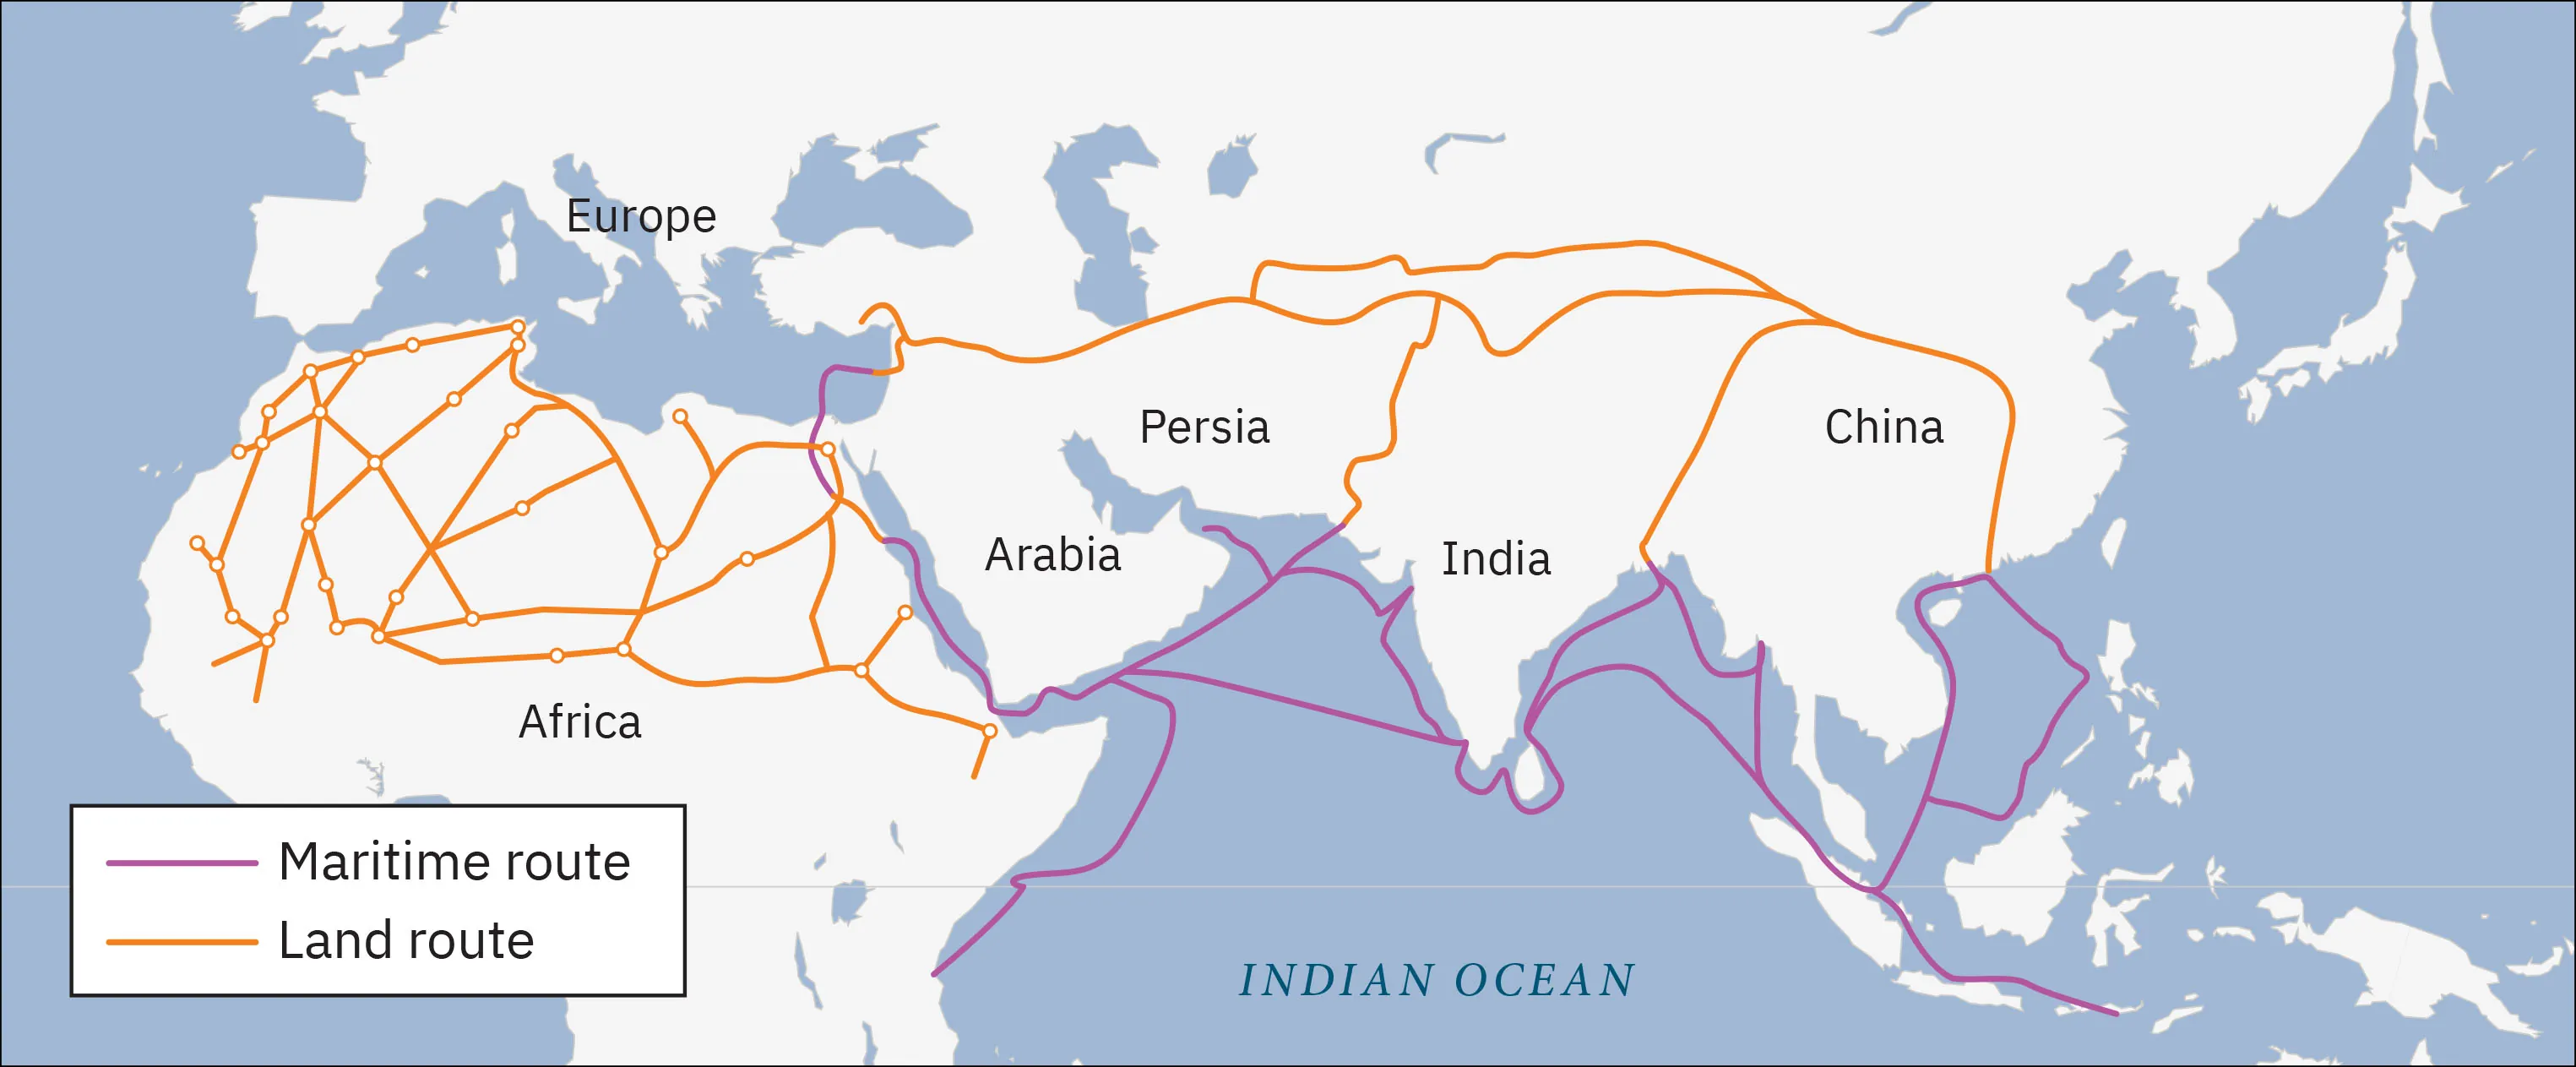 A map shows land in white and water in blue. Europe is labelled in the northwest, Africa in the southwest. East of Africa, Arabia, Persia, India and China are labelled, in that order. Thin purple lines indicating “Maritime route” run east from the waters south of China, south of India, south of Persia, and Arabia, and up and down the eastern coast of Africa. One runs up the western coast of Arabia and heads toward Europe. Orange lines indicating “Land route” are shown starting in China, heading west just north of India and through Persia, ending at a purple line northwest of Arabia. The orange lines pick up in the northern part of Africa and crisscross the continent connecting at small white and orange unlabeled circles throughout.